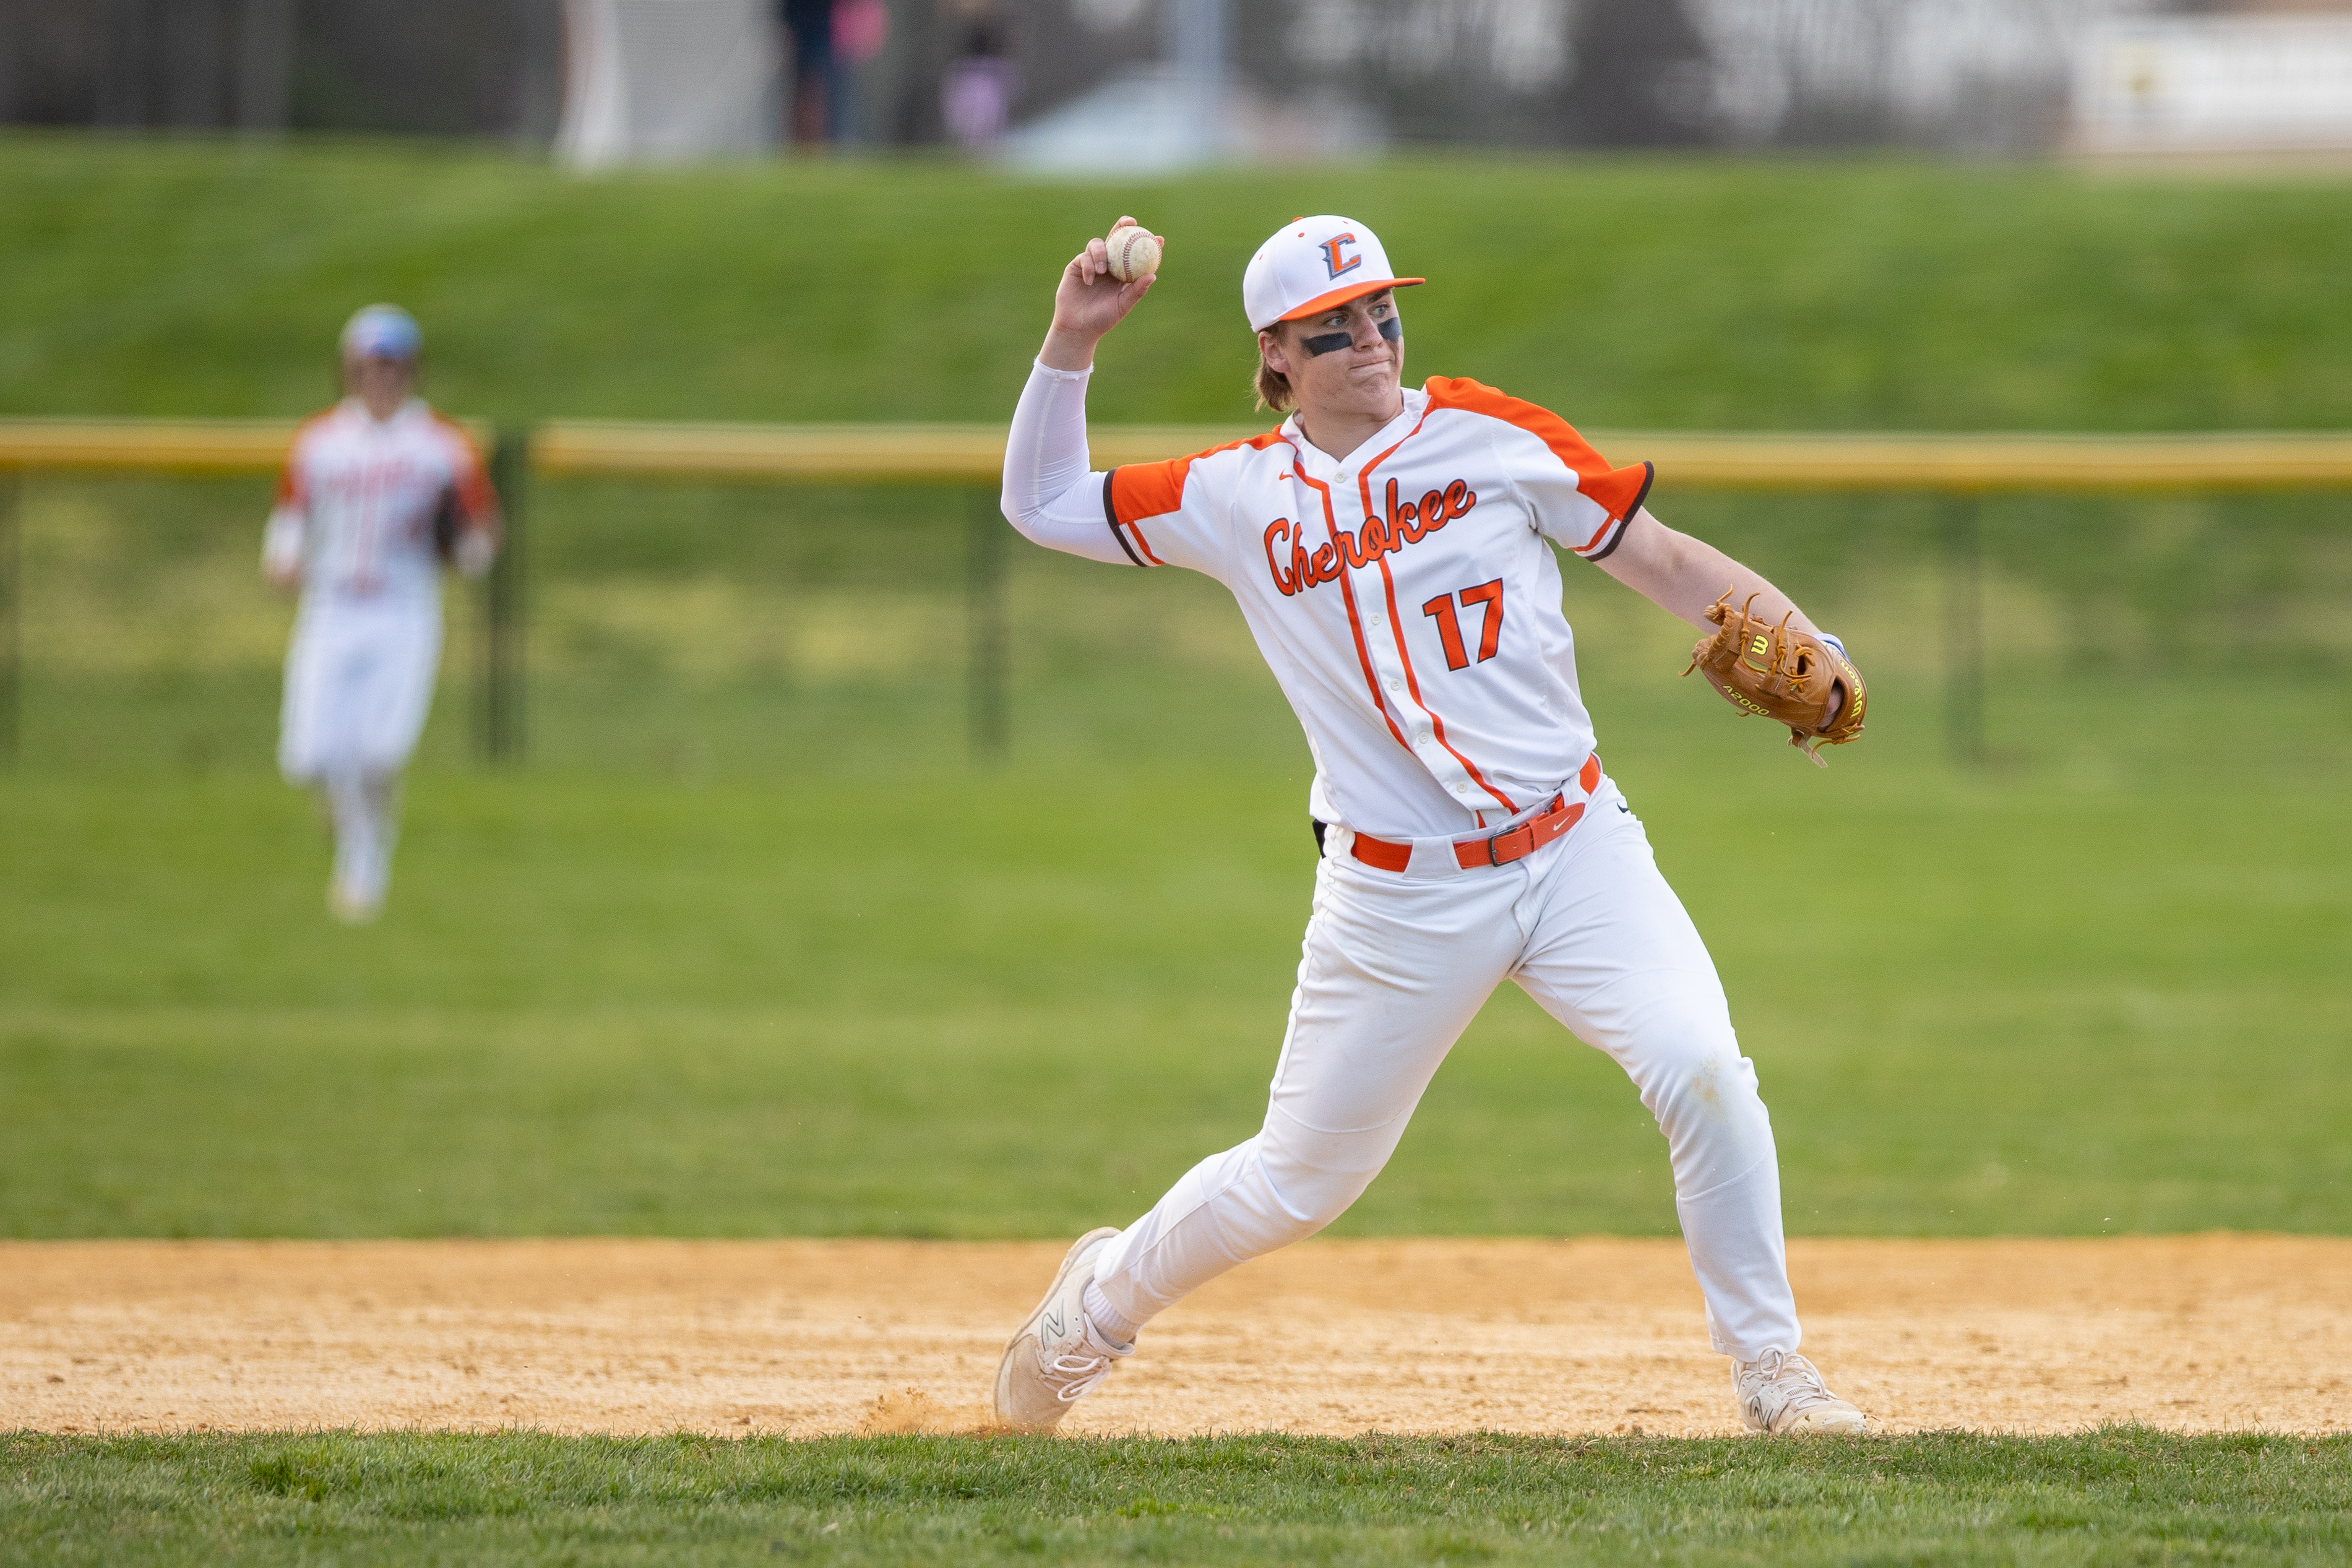 Brett Chiesa (17) of Cherokee, throws to first in Marlton, NJ on Monday, April 3, 2023.